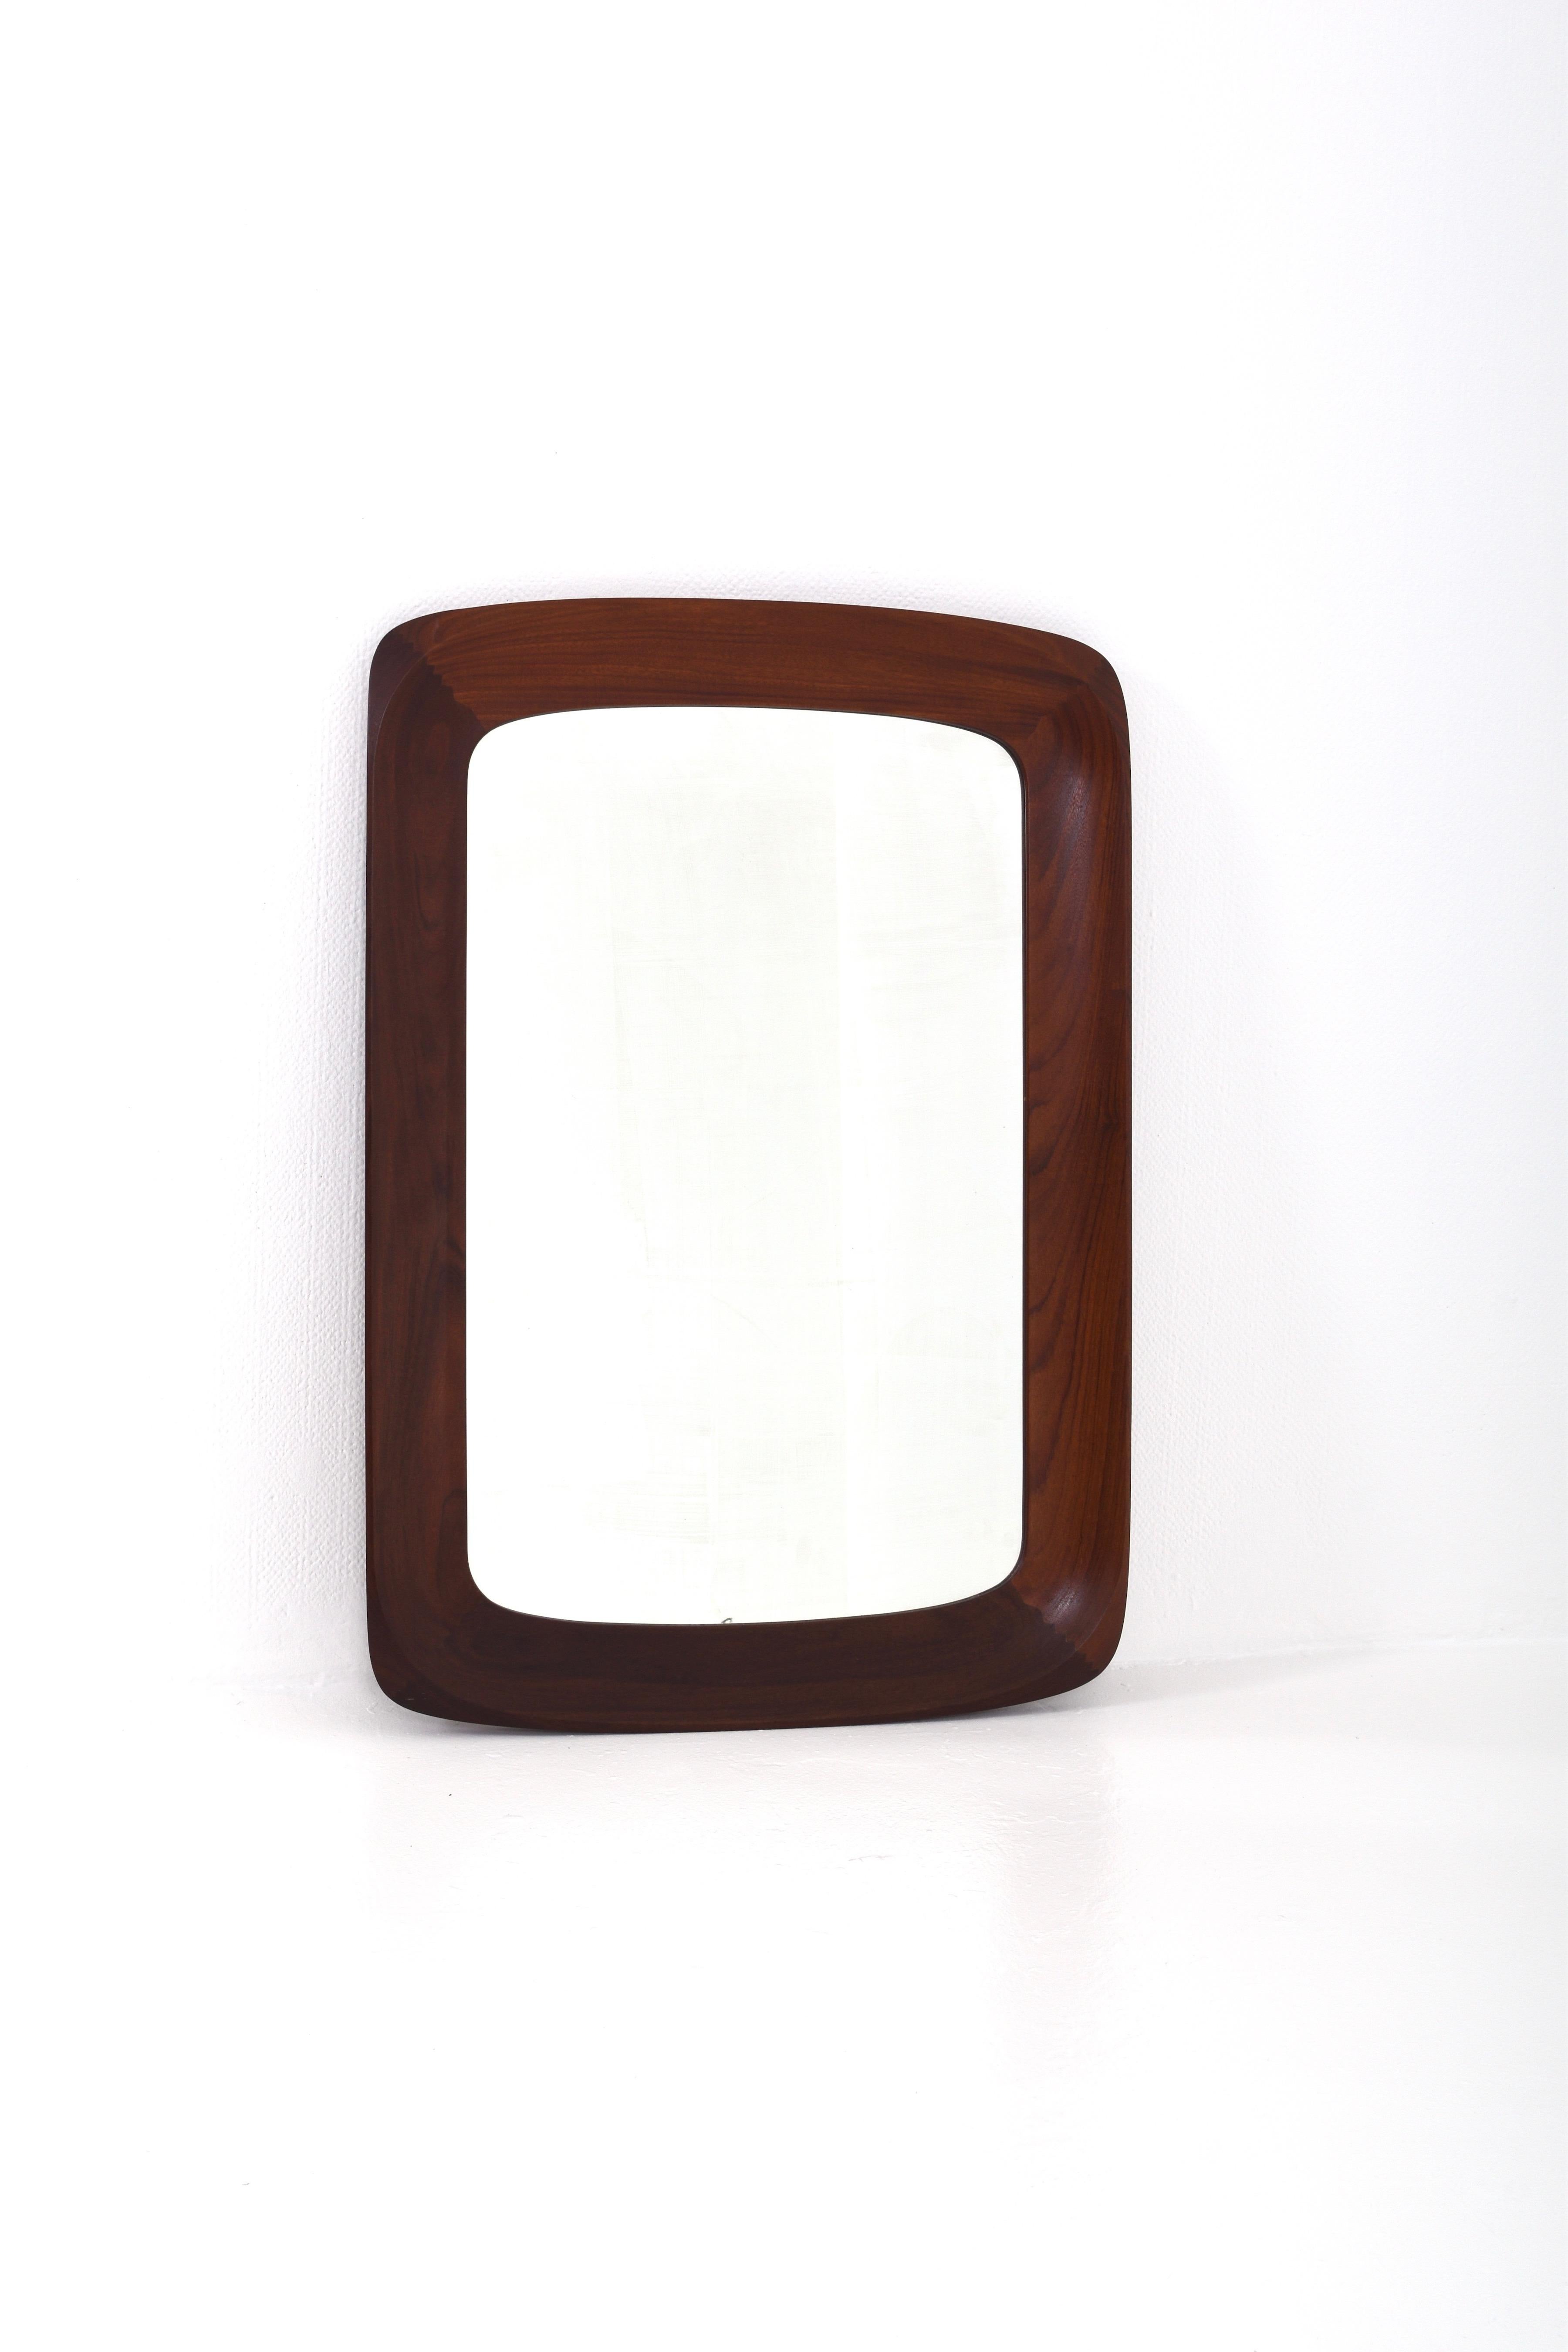 This mirror is a really fine piece of craftsmanship, with wonderful details and shapes. The frame is made of solid teak, the color is dark brown.

It is in fine vintage condition, there is age-related wear on the glass.
The mirror is labeled on the